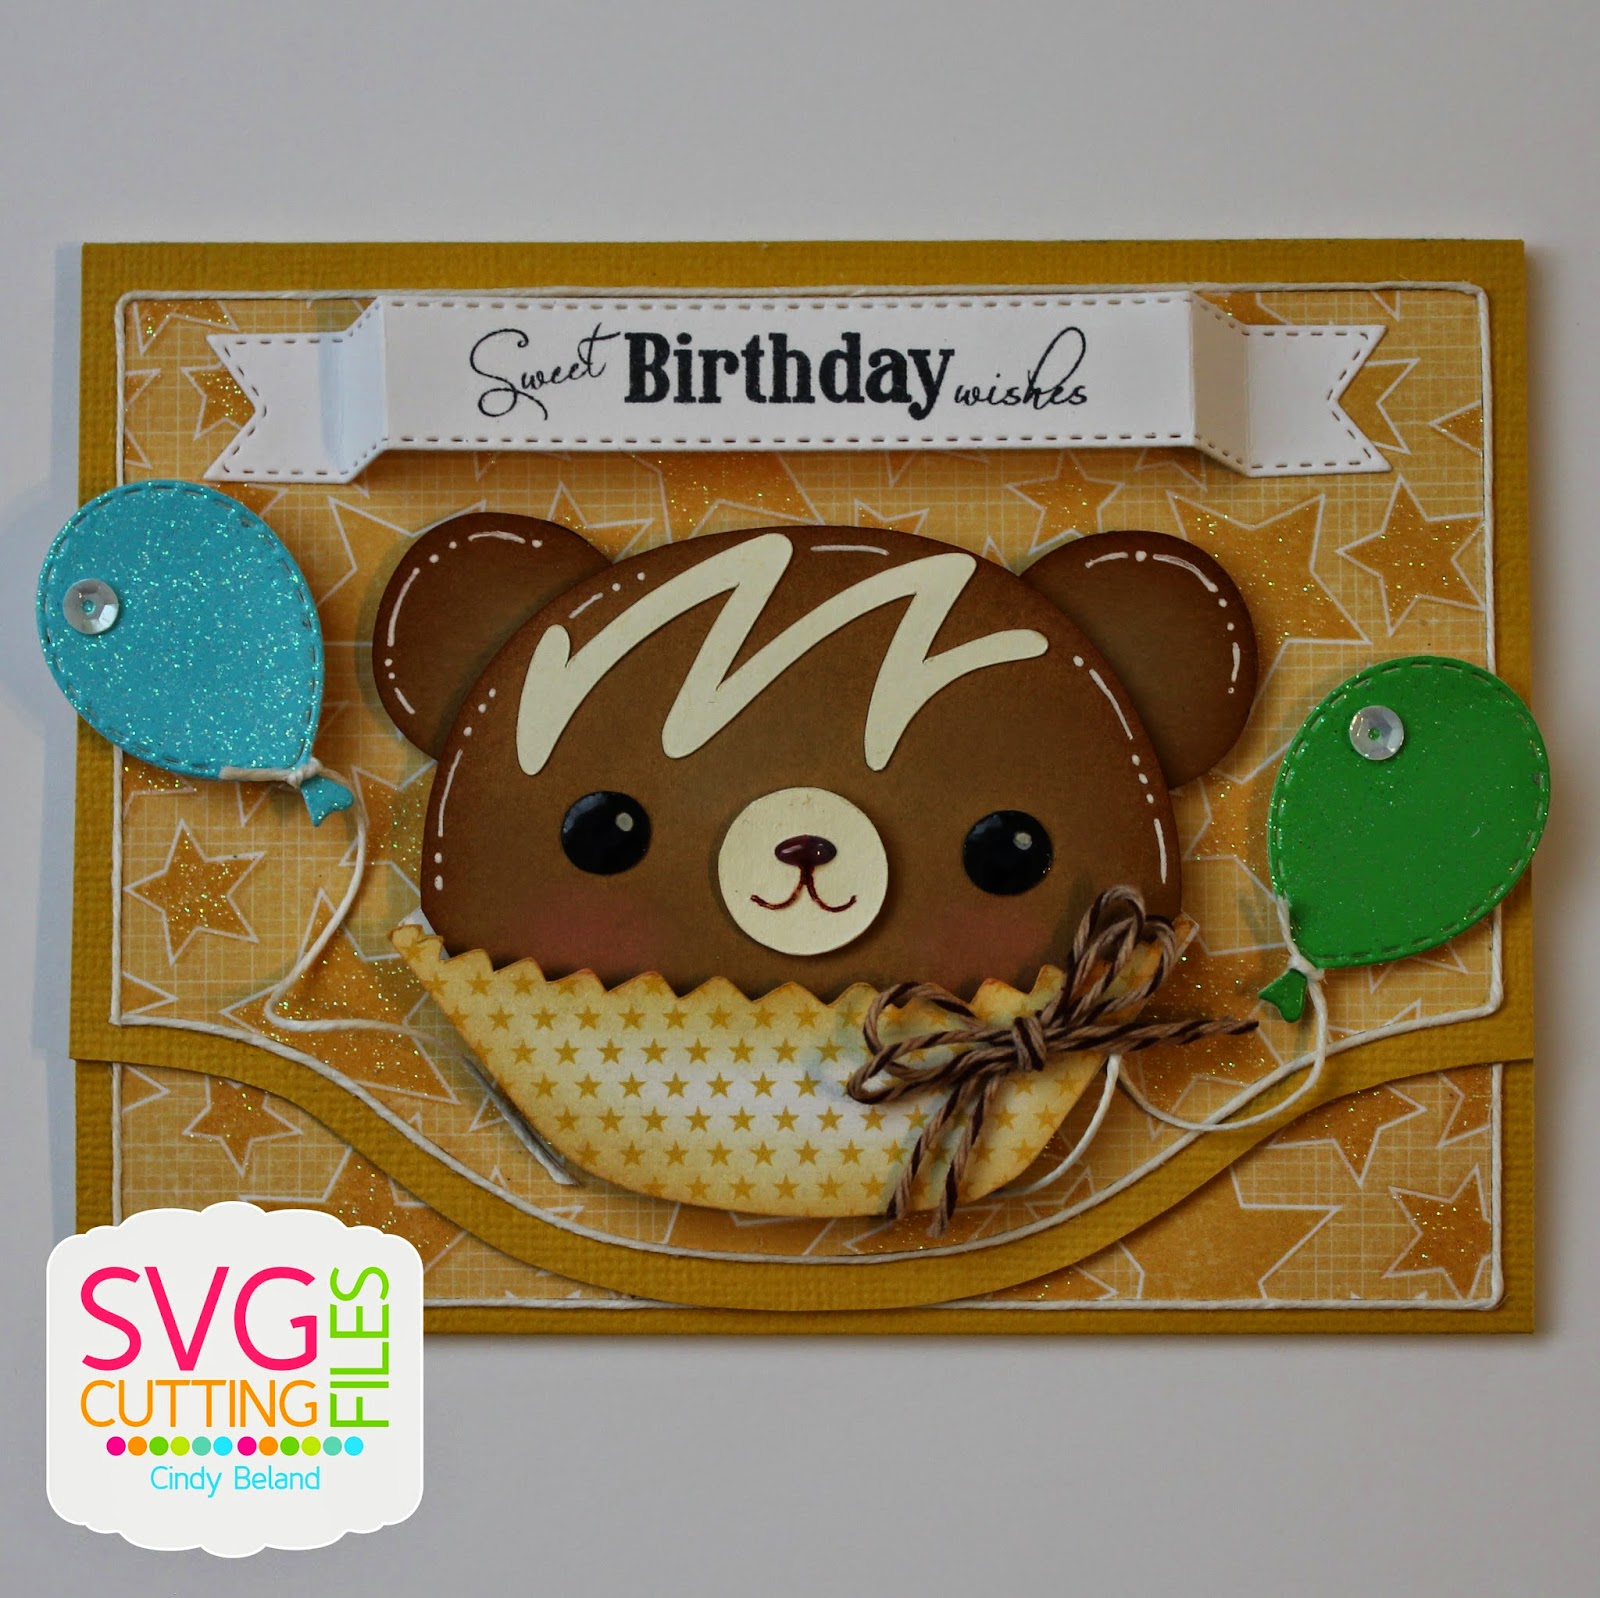 Download SVG Cutting Files: Sweet Birthday wishes!!!